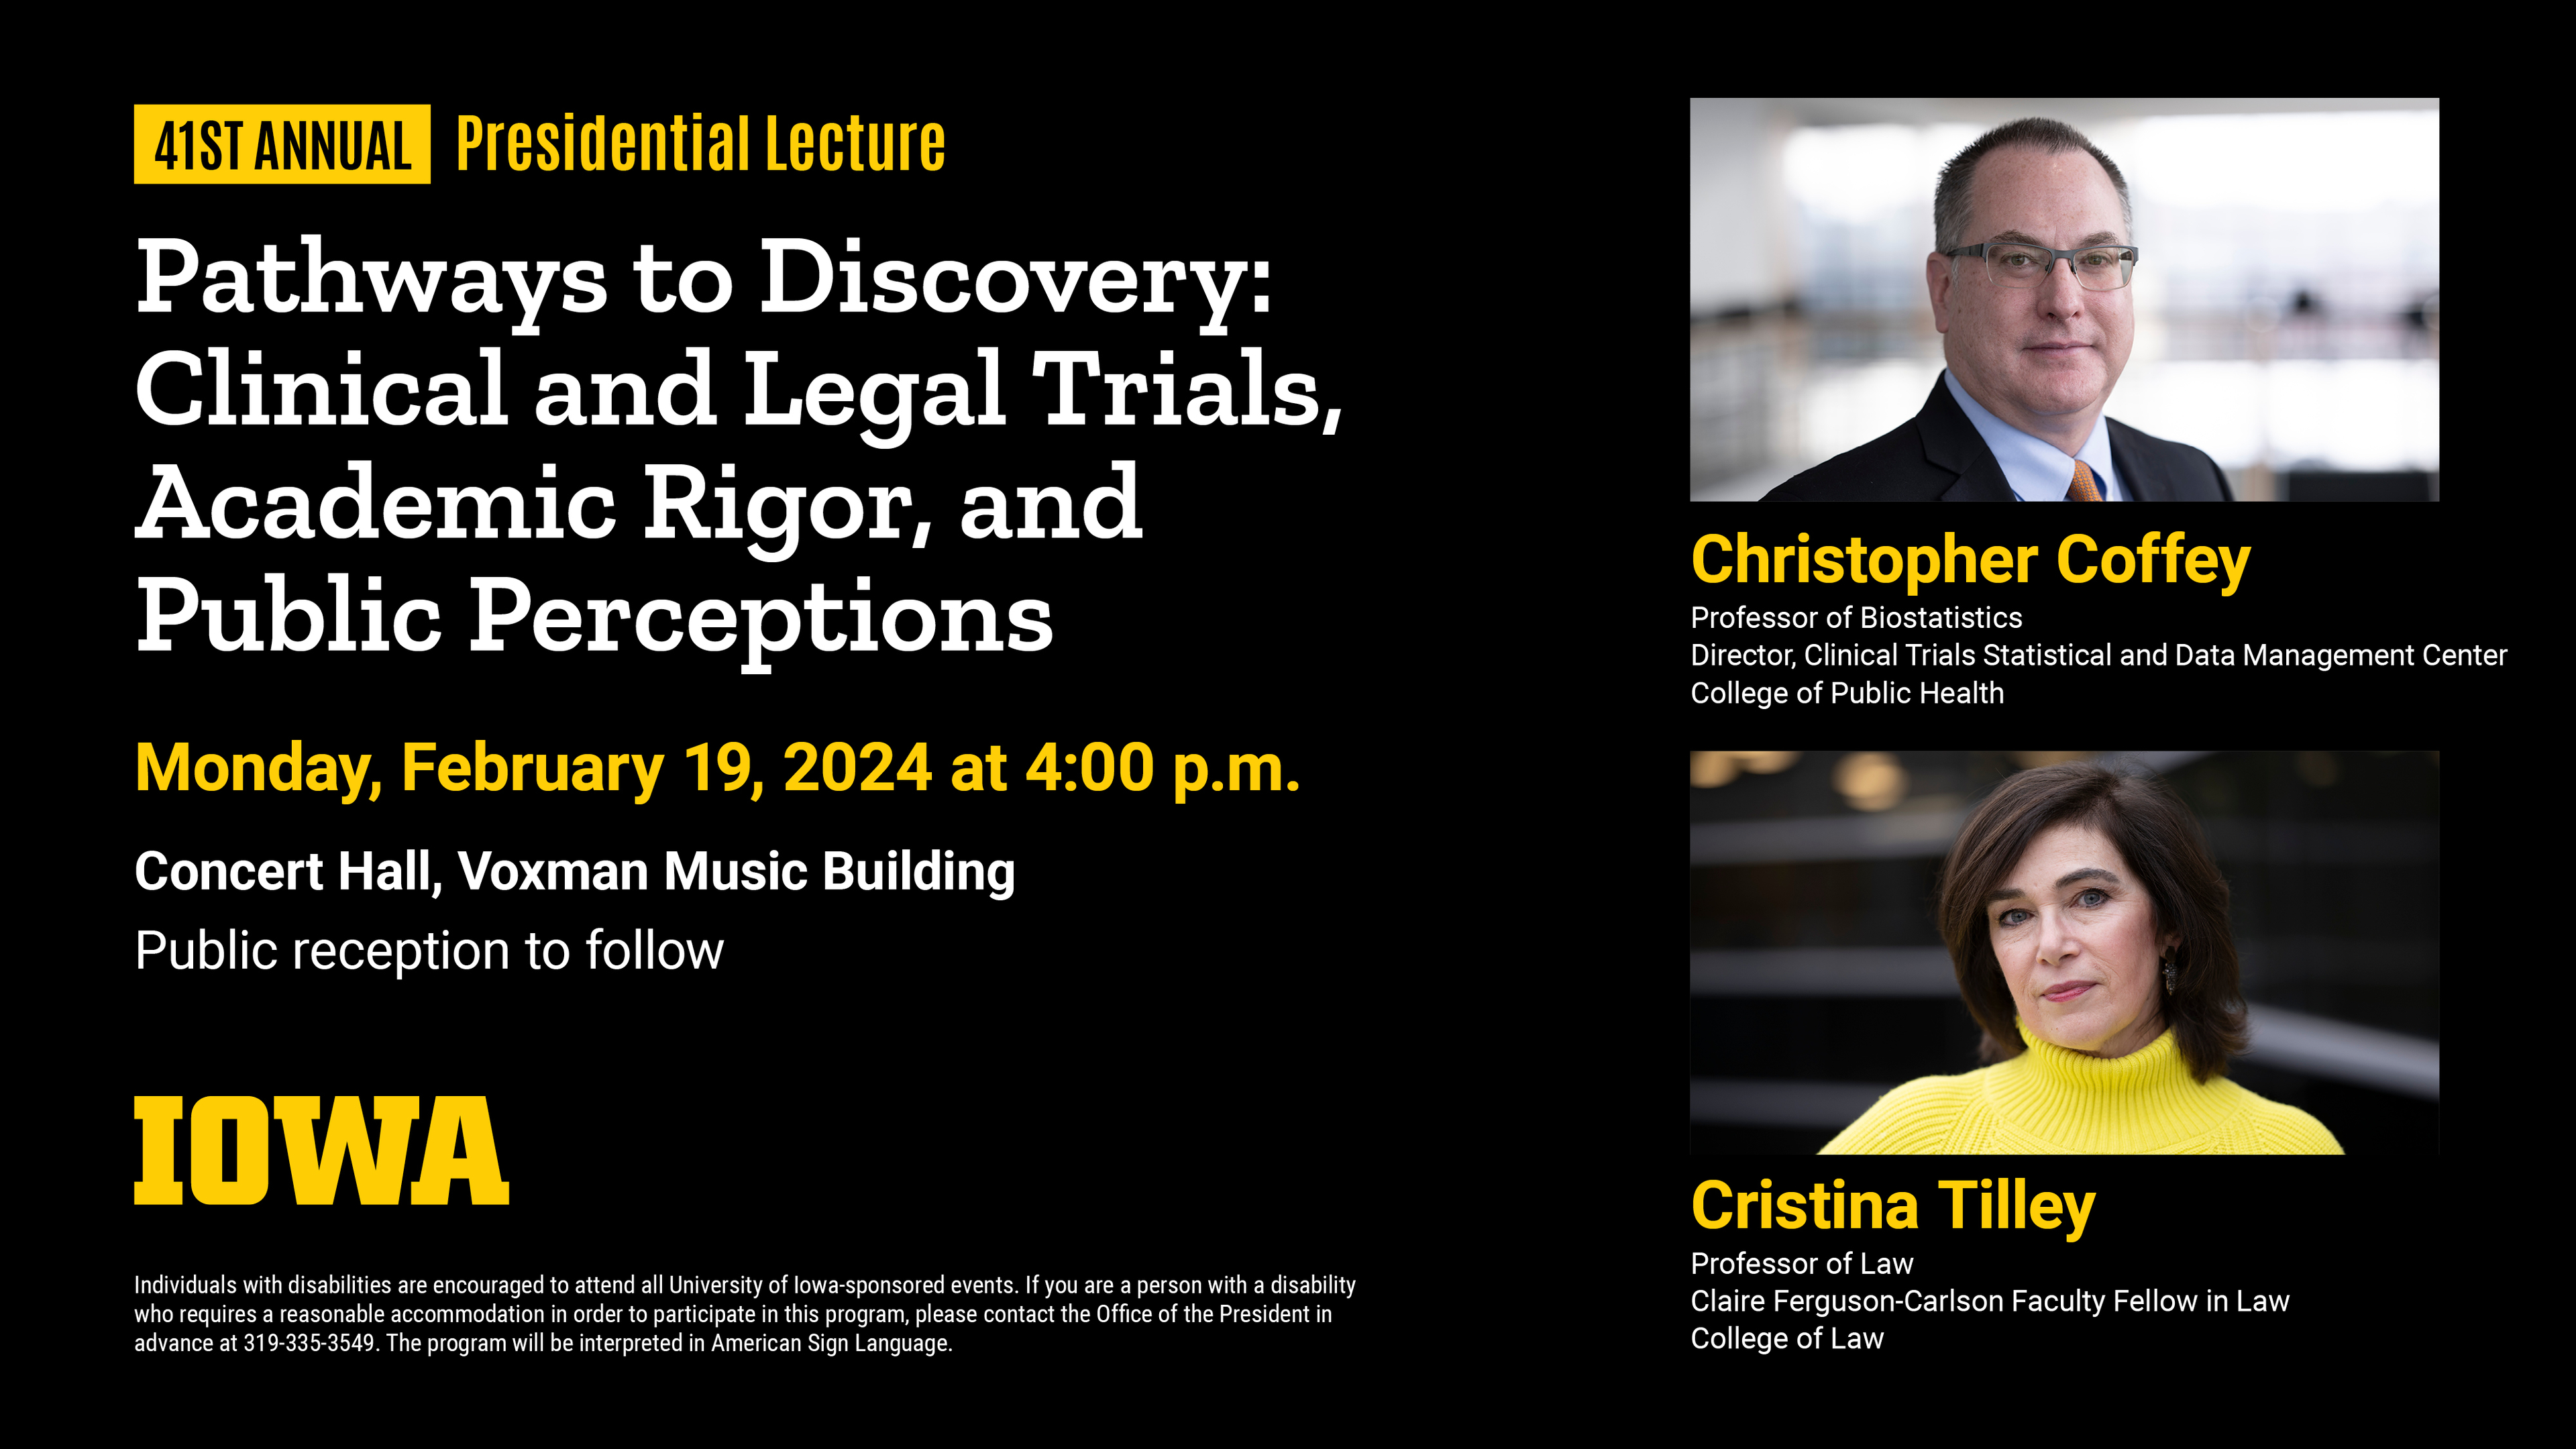 41st Annual Presidential Lecture - Pathways to Discovery: Clinical and Legal Trials, Academic Rigor, and Public Perceptions. Monday, February 19, 2024 at 4:00 p.m. at Concert Hall, Voxman Music Building 